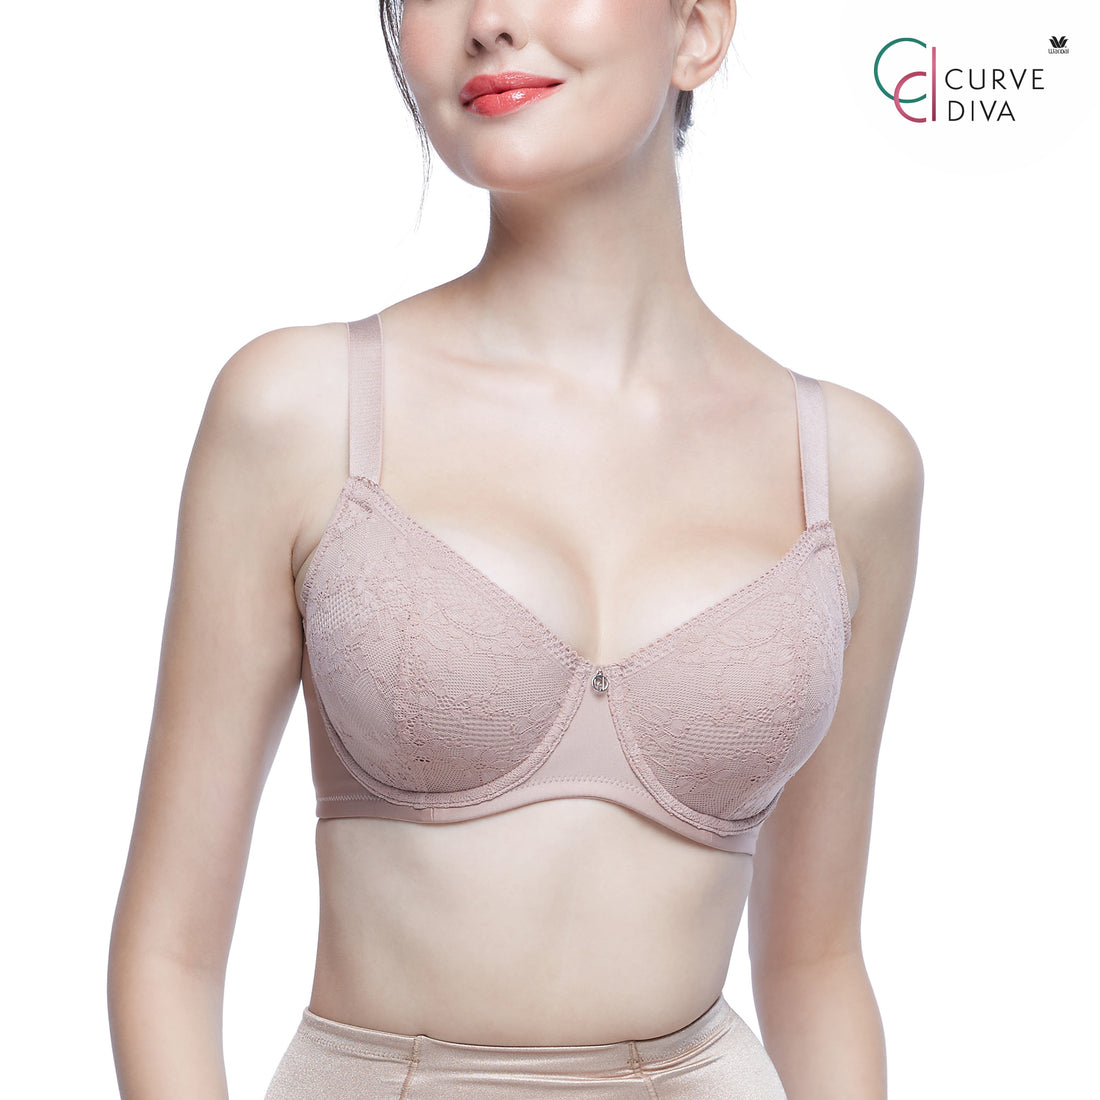 Wacoal Curve Diva Firming bra for large cup girls, model WB7396, beige (BE)